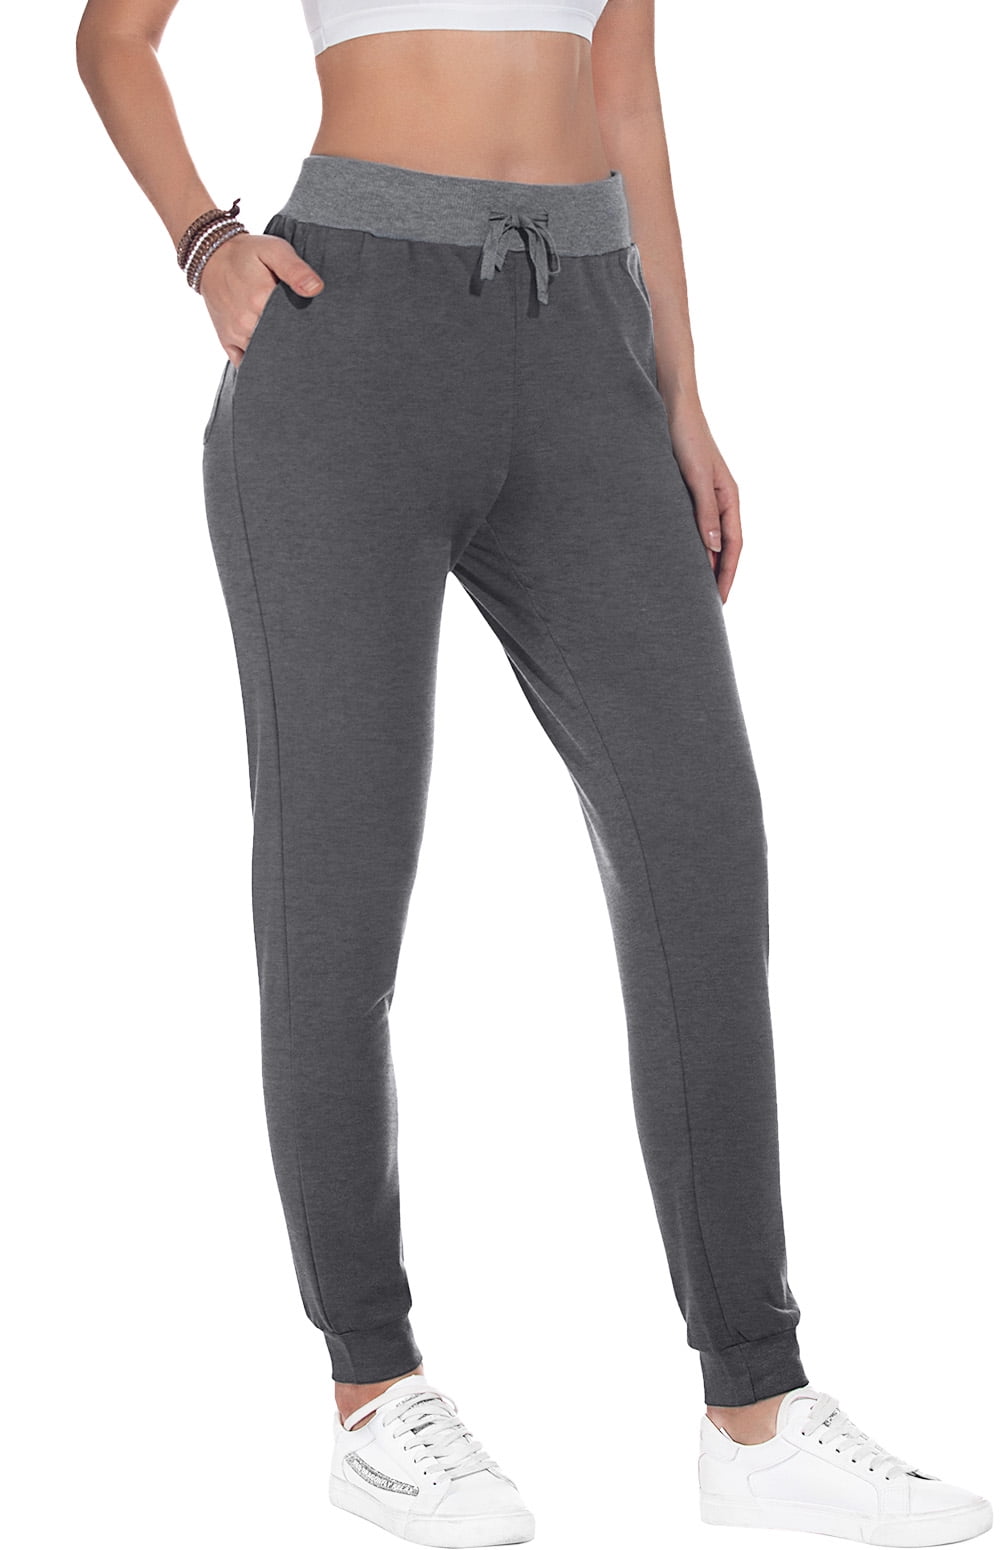 Aiyino Women's Stretch Sweatpants Cozy Joggers Pants Tapered Active ...